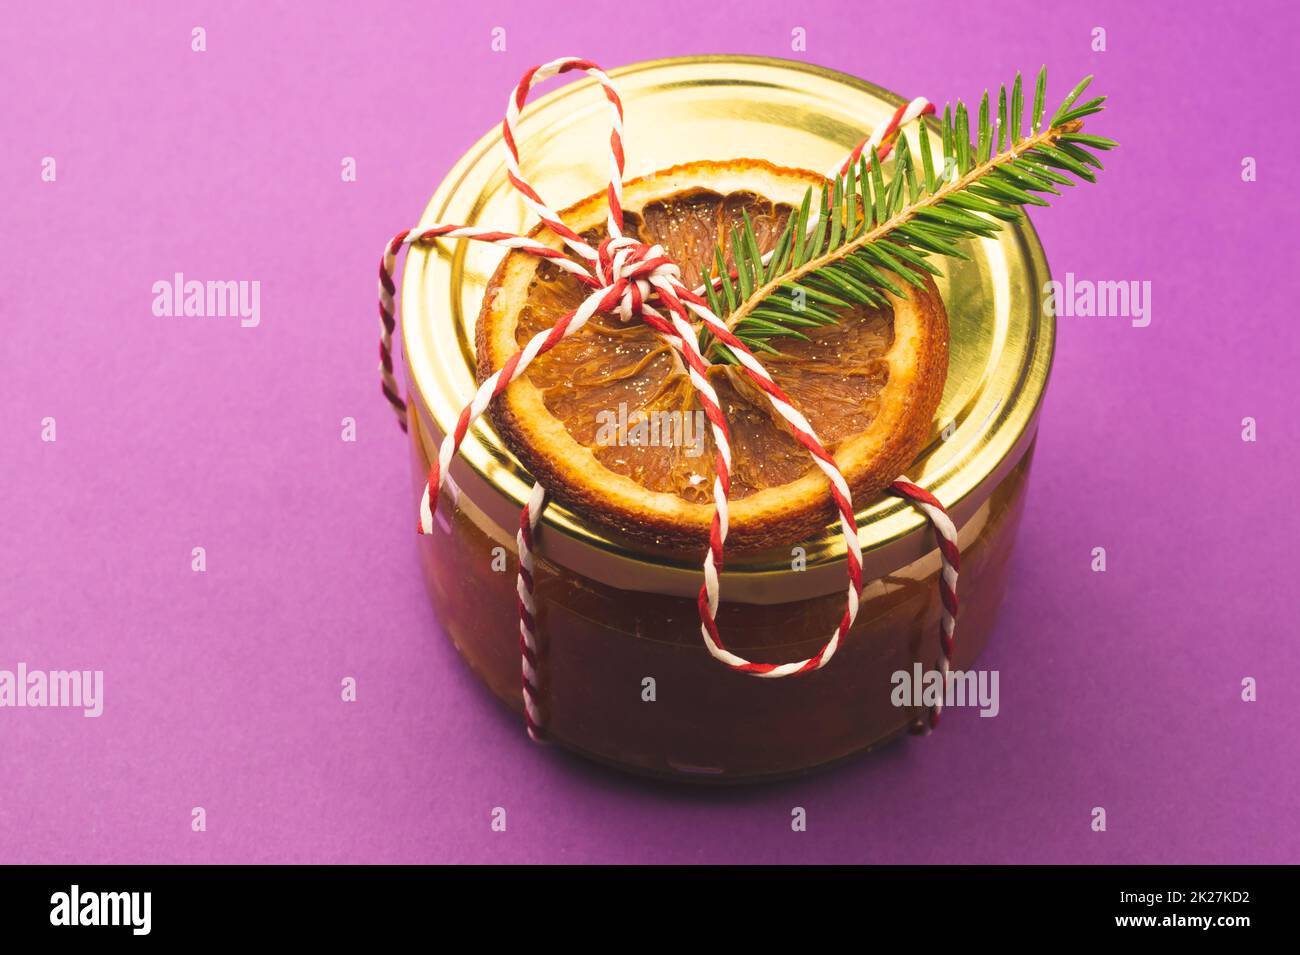 Homemade jam in a decorated jar with orange slice and fir tree twig. Winter gift Stock Photo